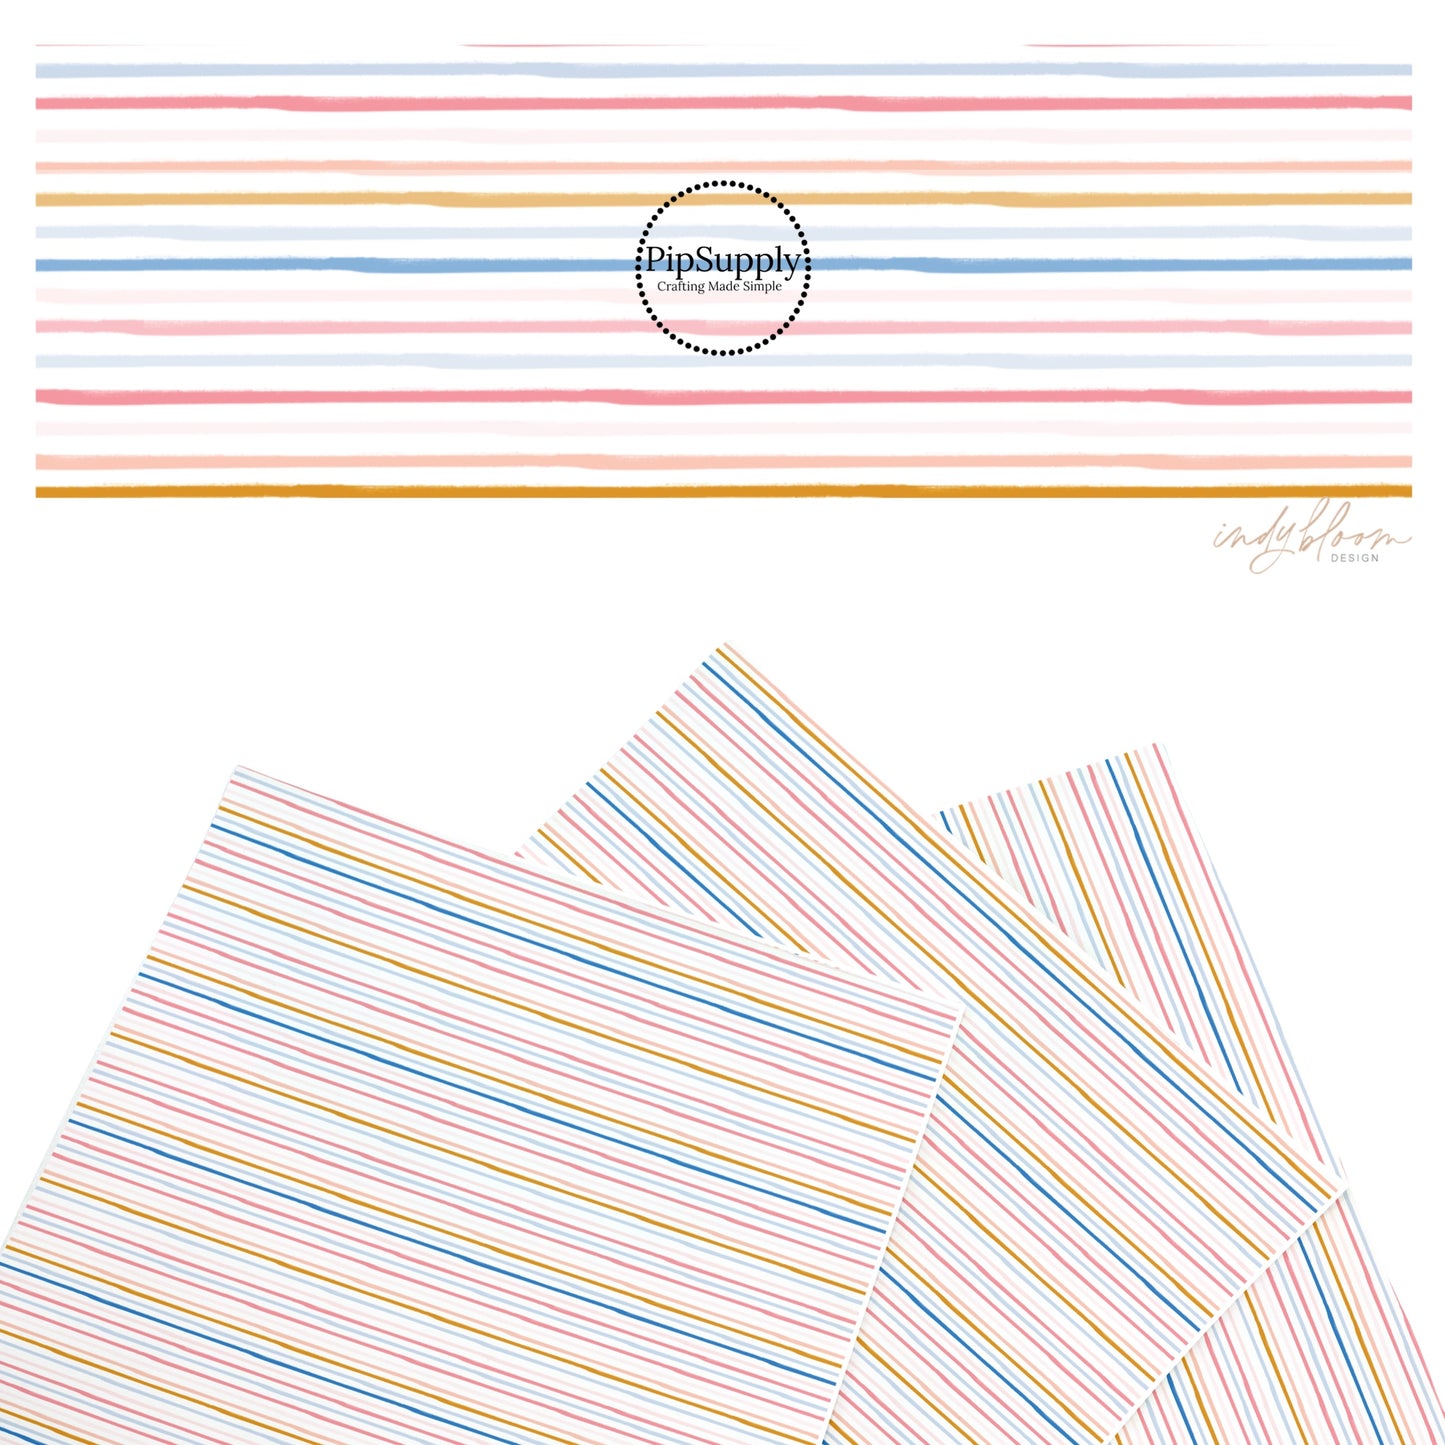 These summer faux leather sheets contain the following design elements: multi colored stripes on white. Our CPSIA compliant faux leather sheets or rolls can be used for all types of crafting projects.